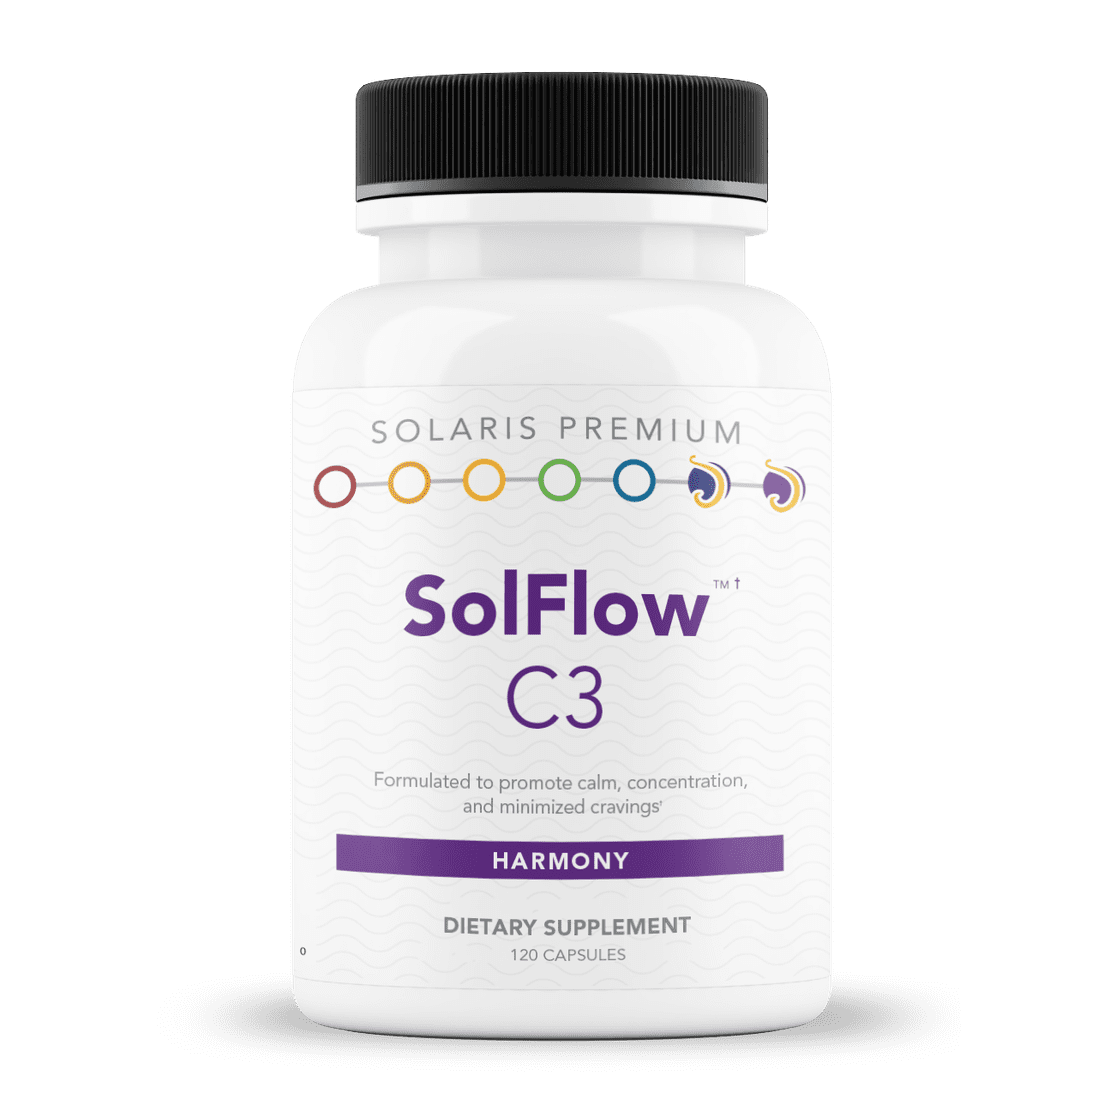 SolFlow C3 - To Support Calm, Cognition and Cravings